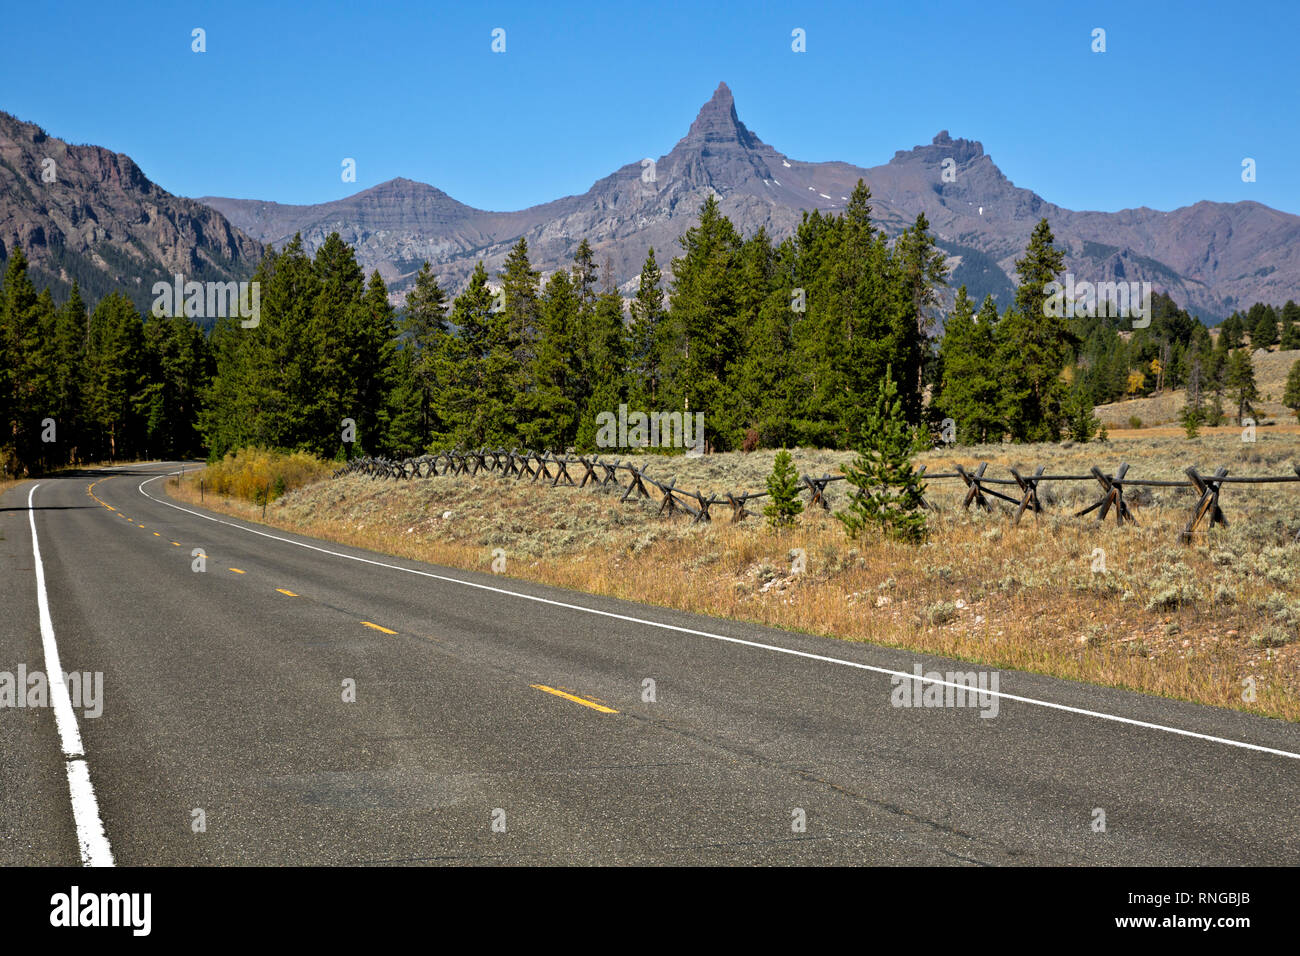 WY03786-00...WYOMING - The Beartooth Highway in the Clark Fork Yellowstone River Valley of the Shoshone National Forest. Stock Photo